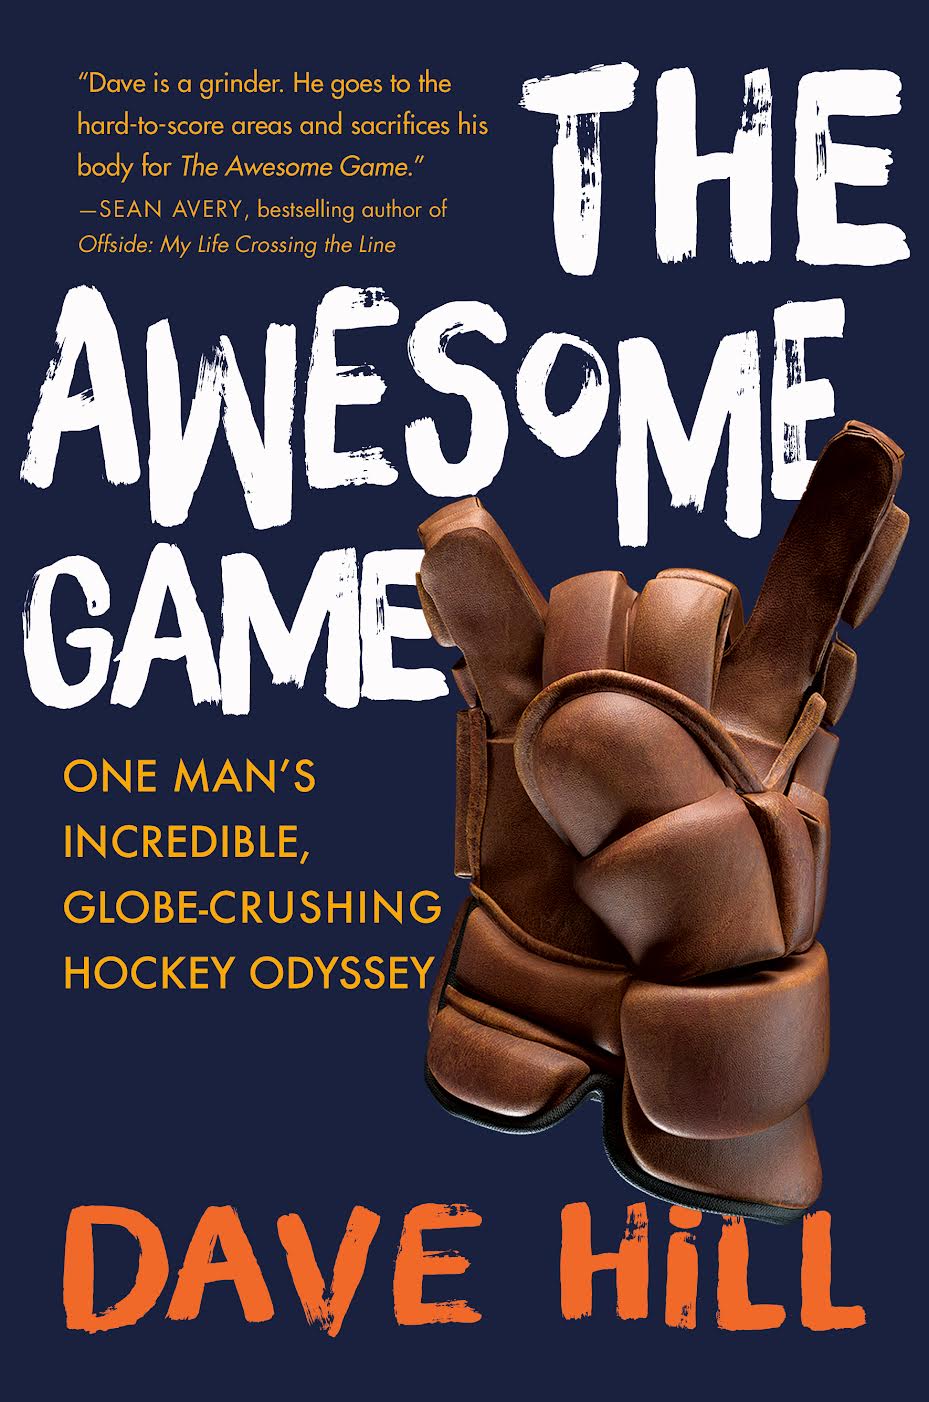 Book Launch: The Awesome Game by Dave Hill in conversation with Mike Sacks